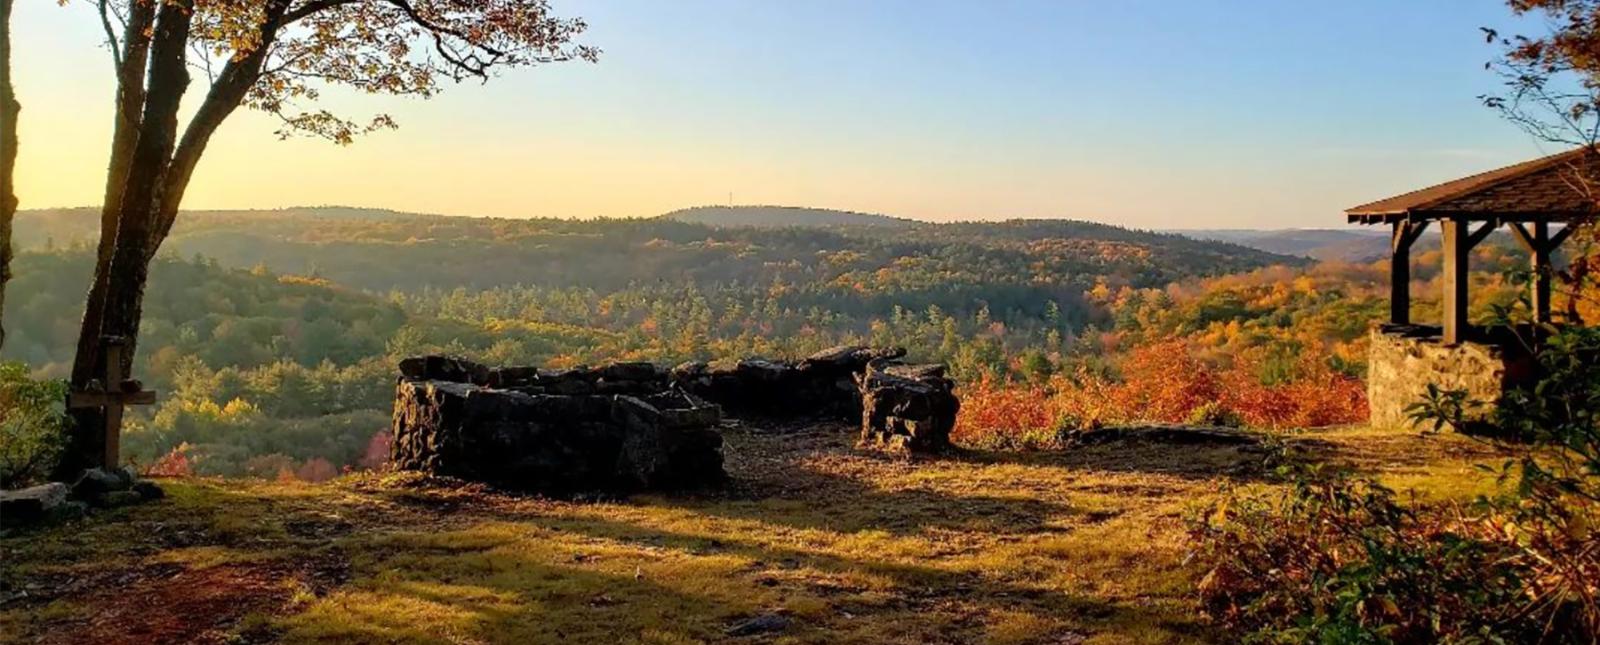 A beautiful fall landscape view (Instagram@nwctscenes)